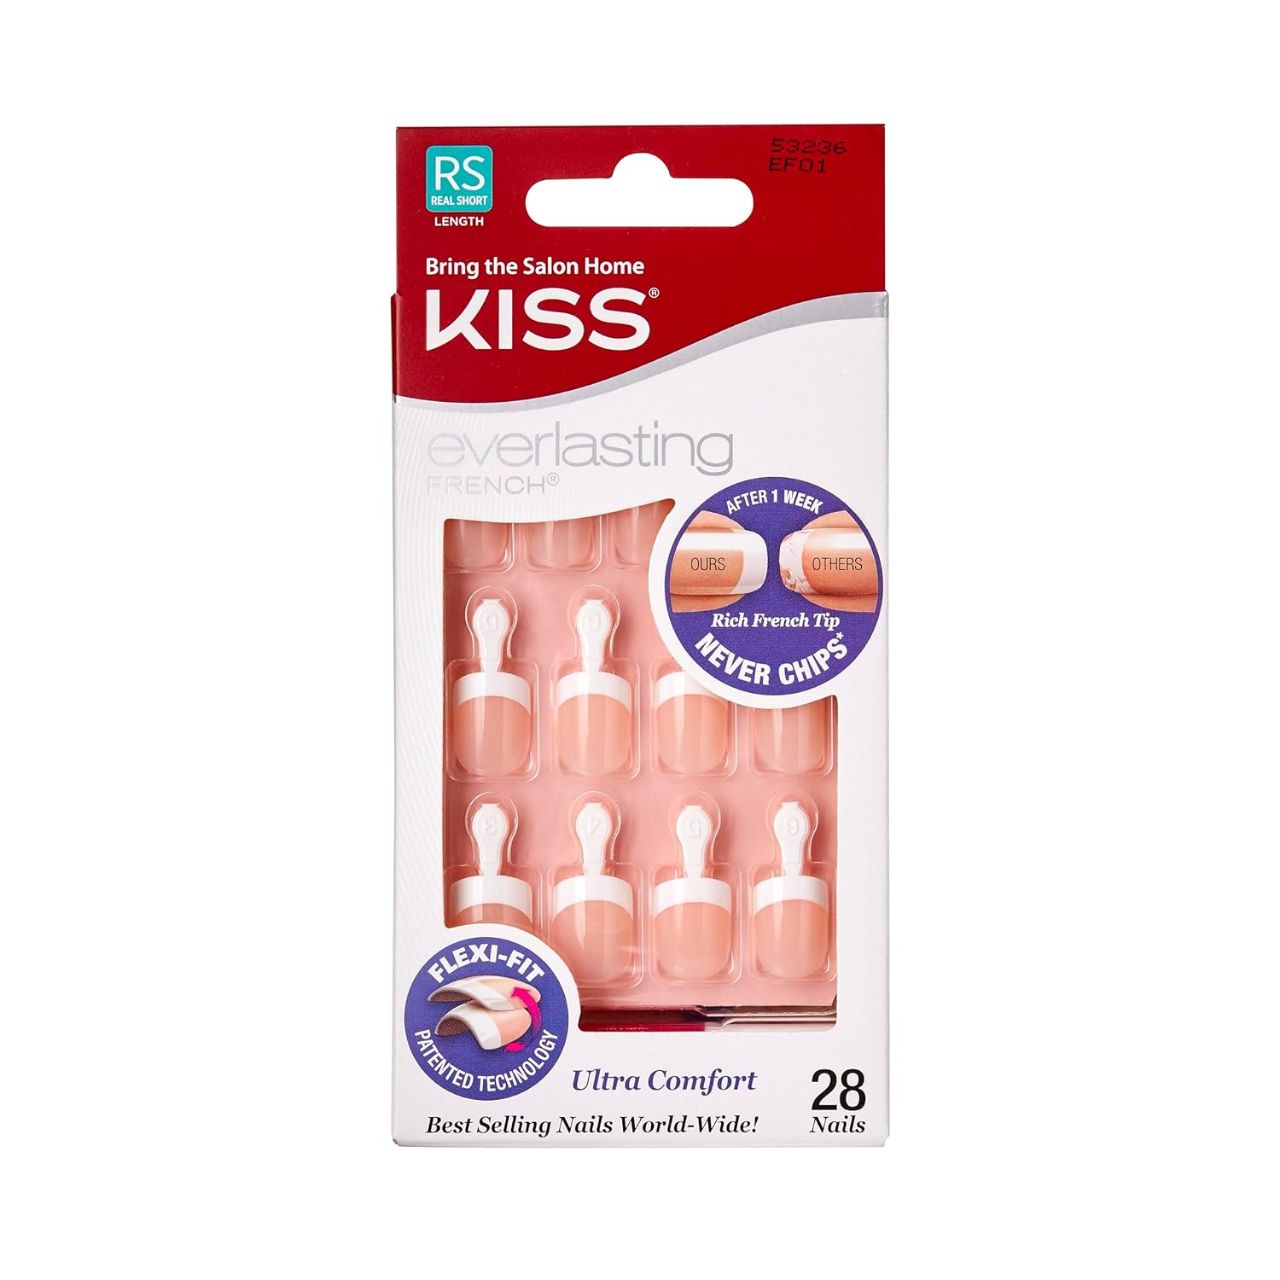 Kiss Everlasting Press On French Nails Real short length Flex fit and extra comfort